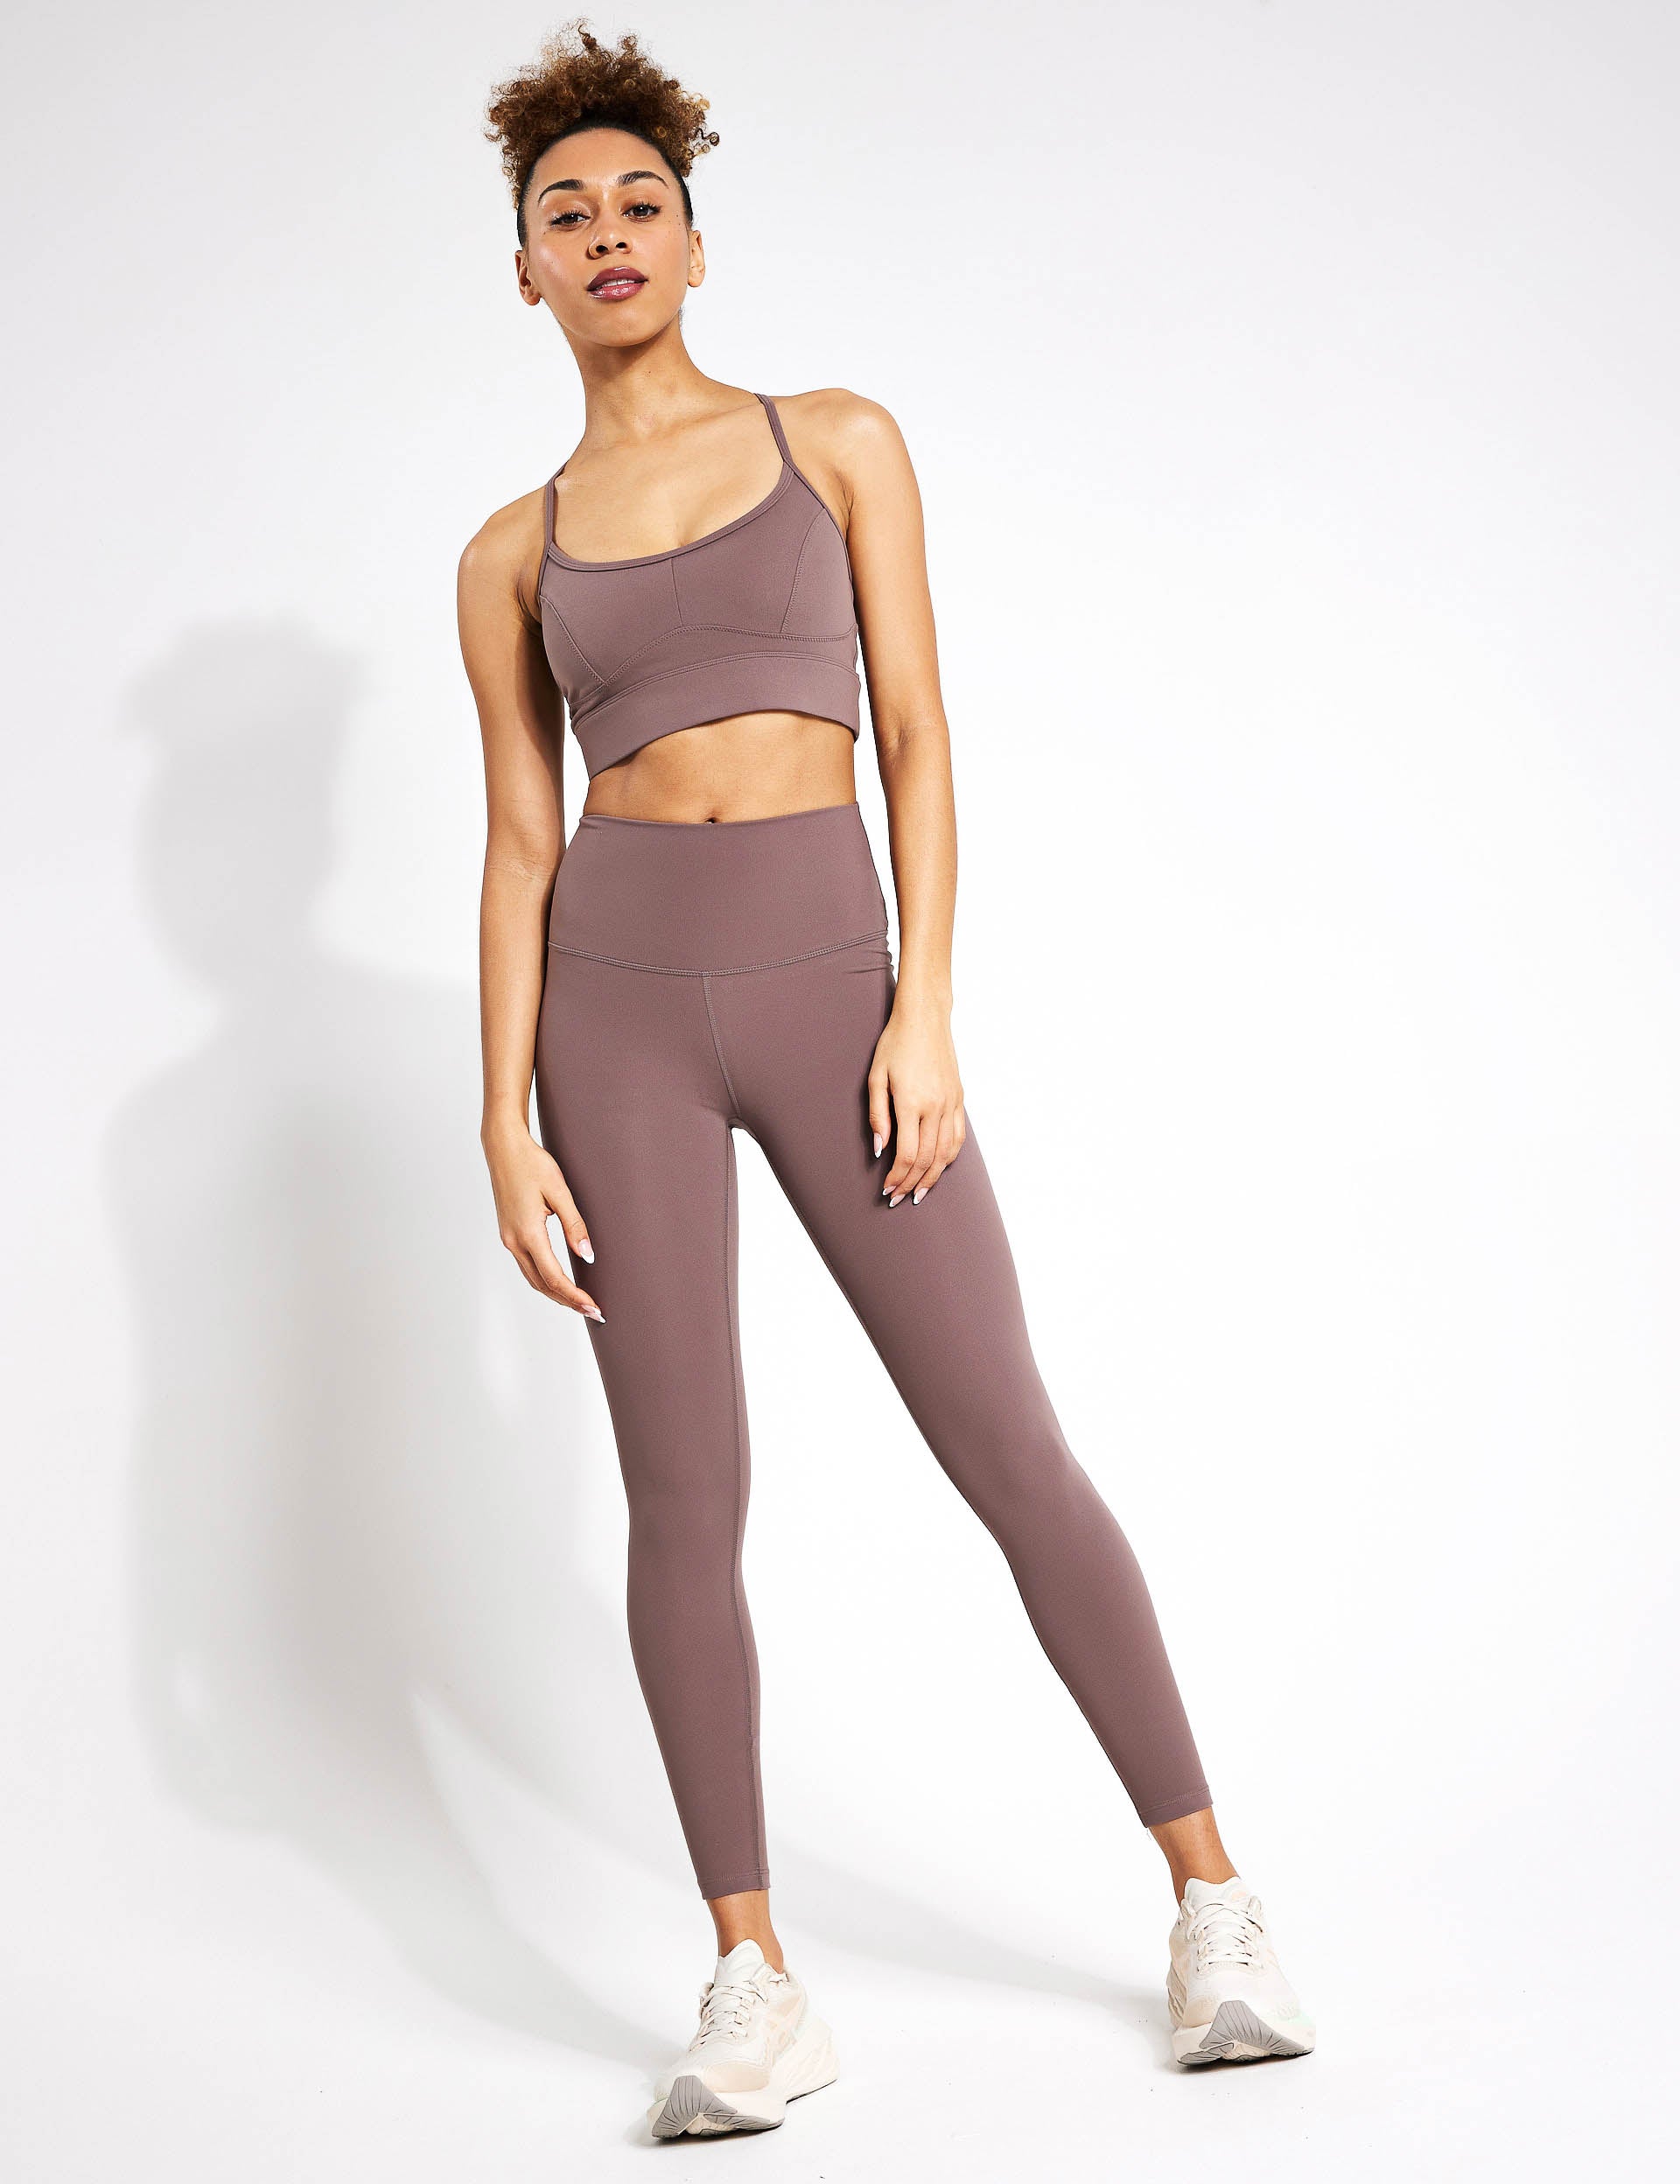 VARLEY MOVE POCKET HIGH LEGGINGS 25 - COCOA BROWN – Work It Out